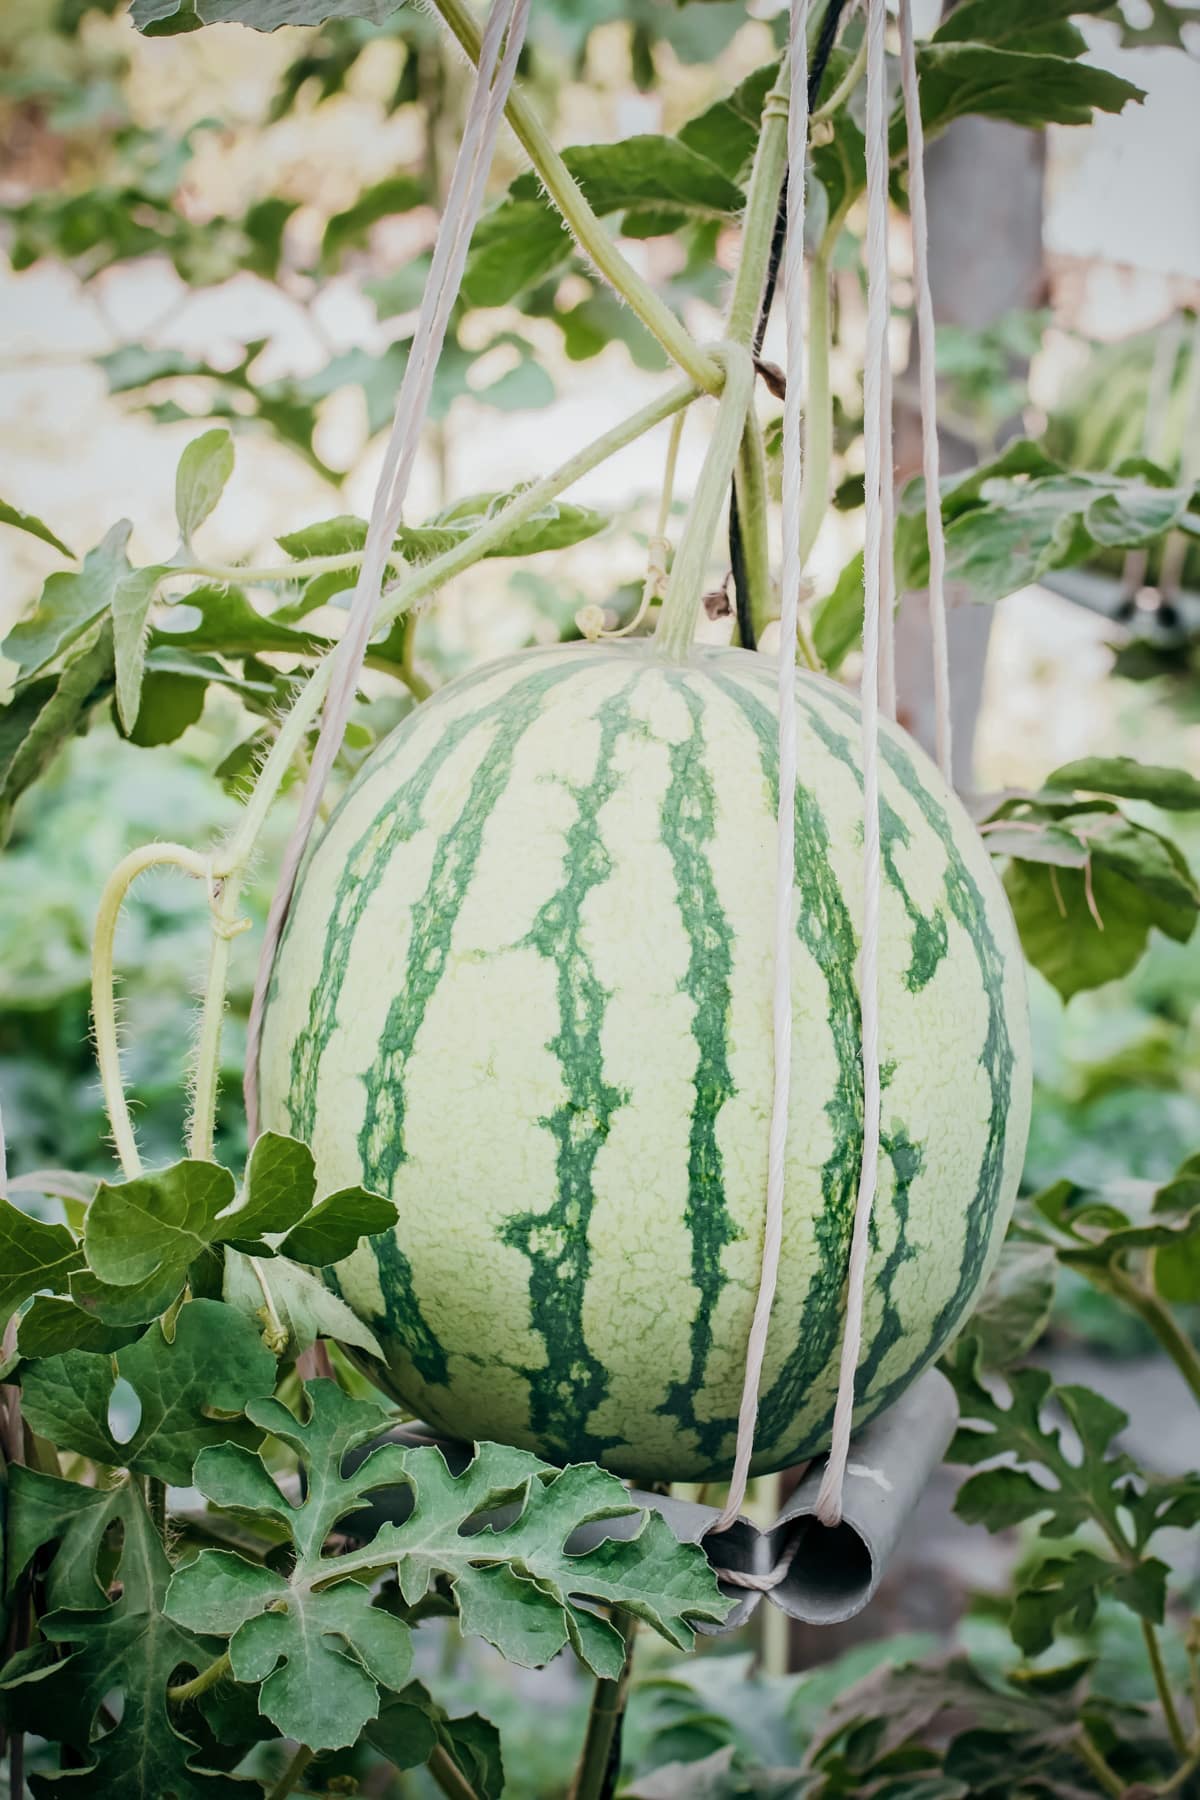 Light green watermelon growing vertically being supported by rope.